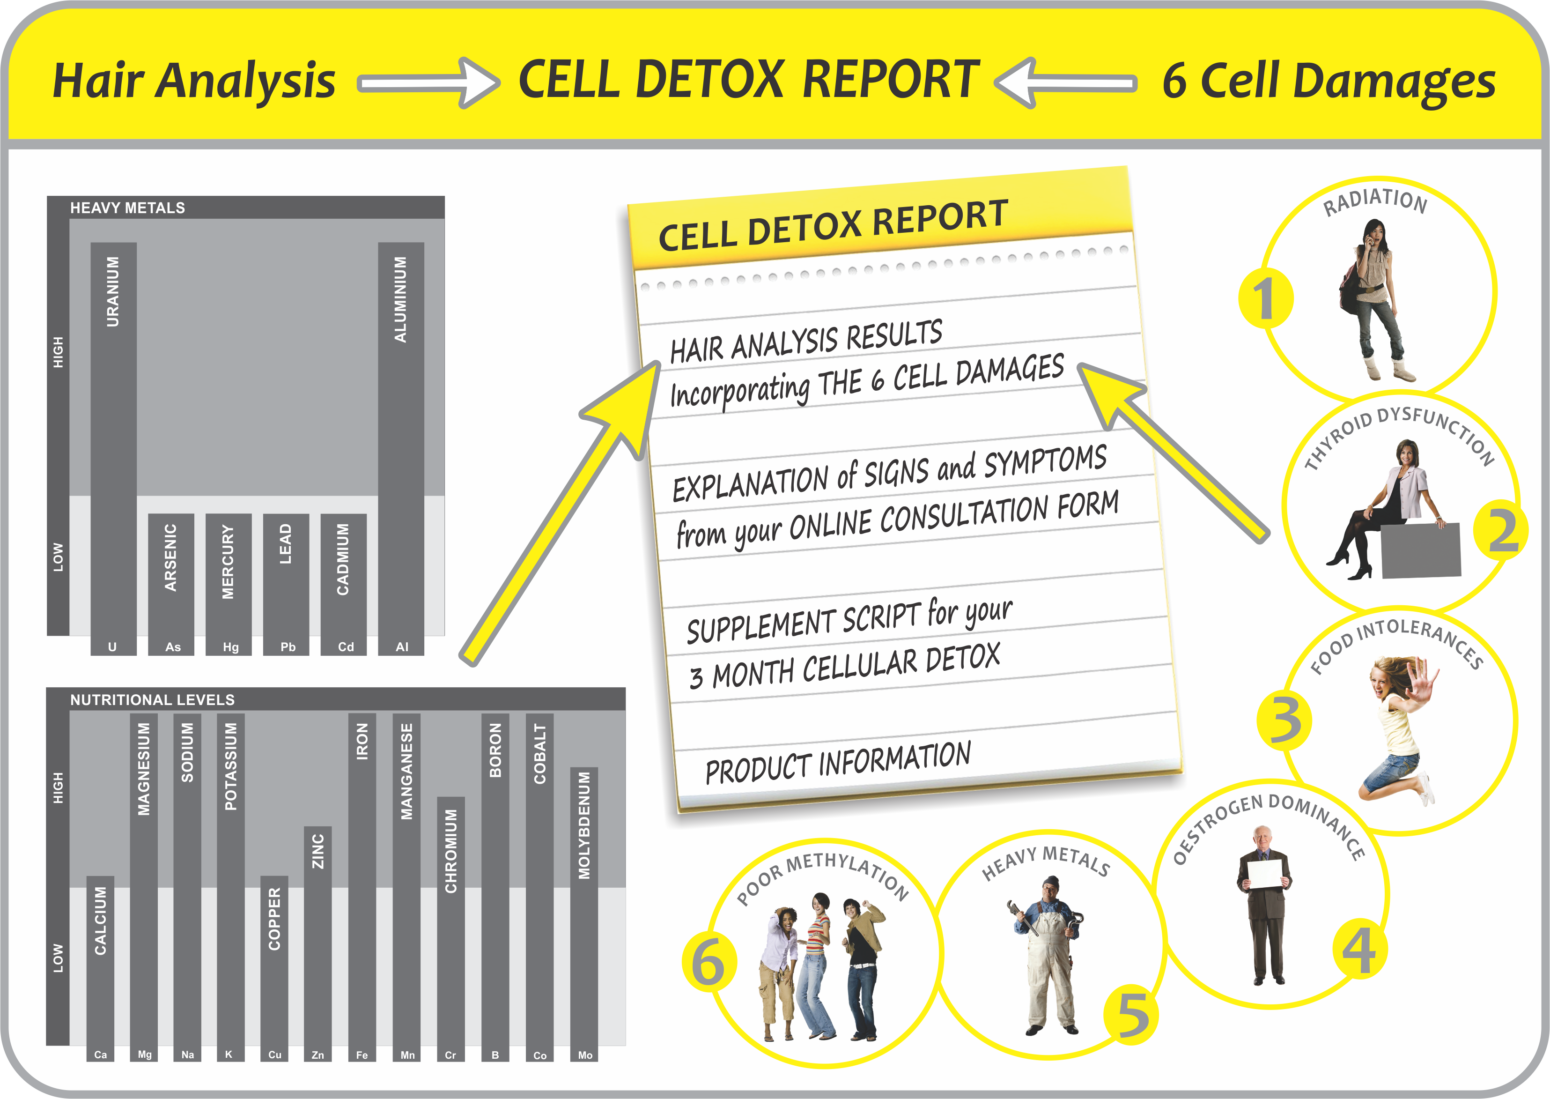 6 Cell Damages - current